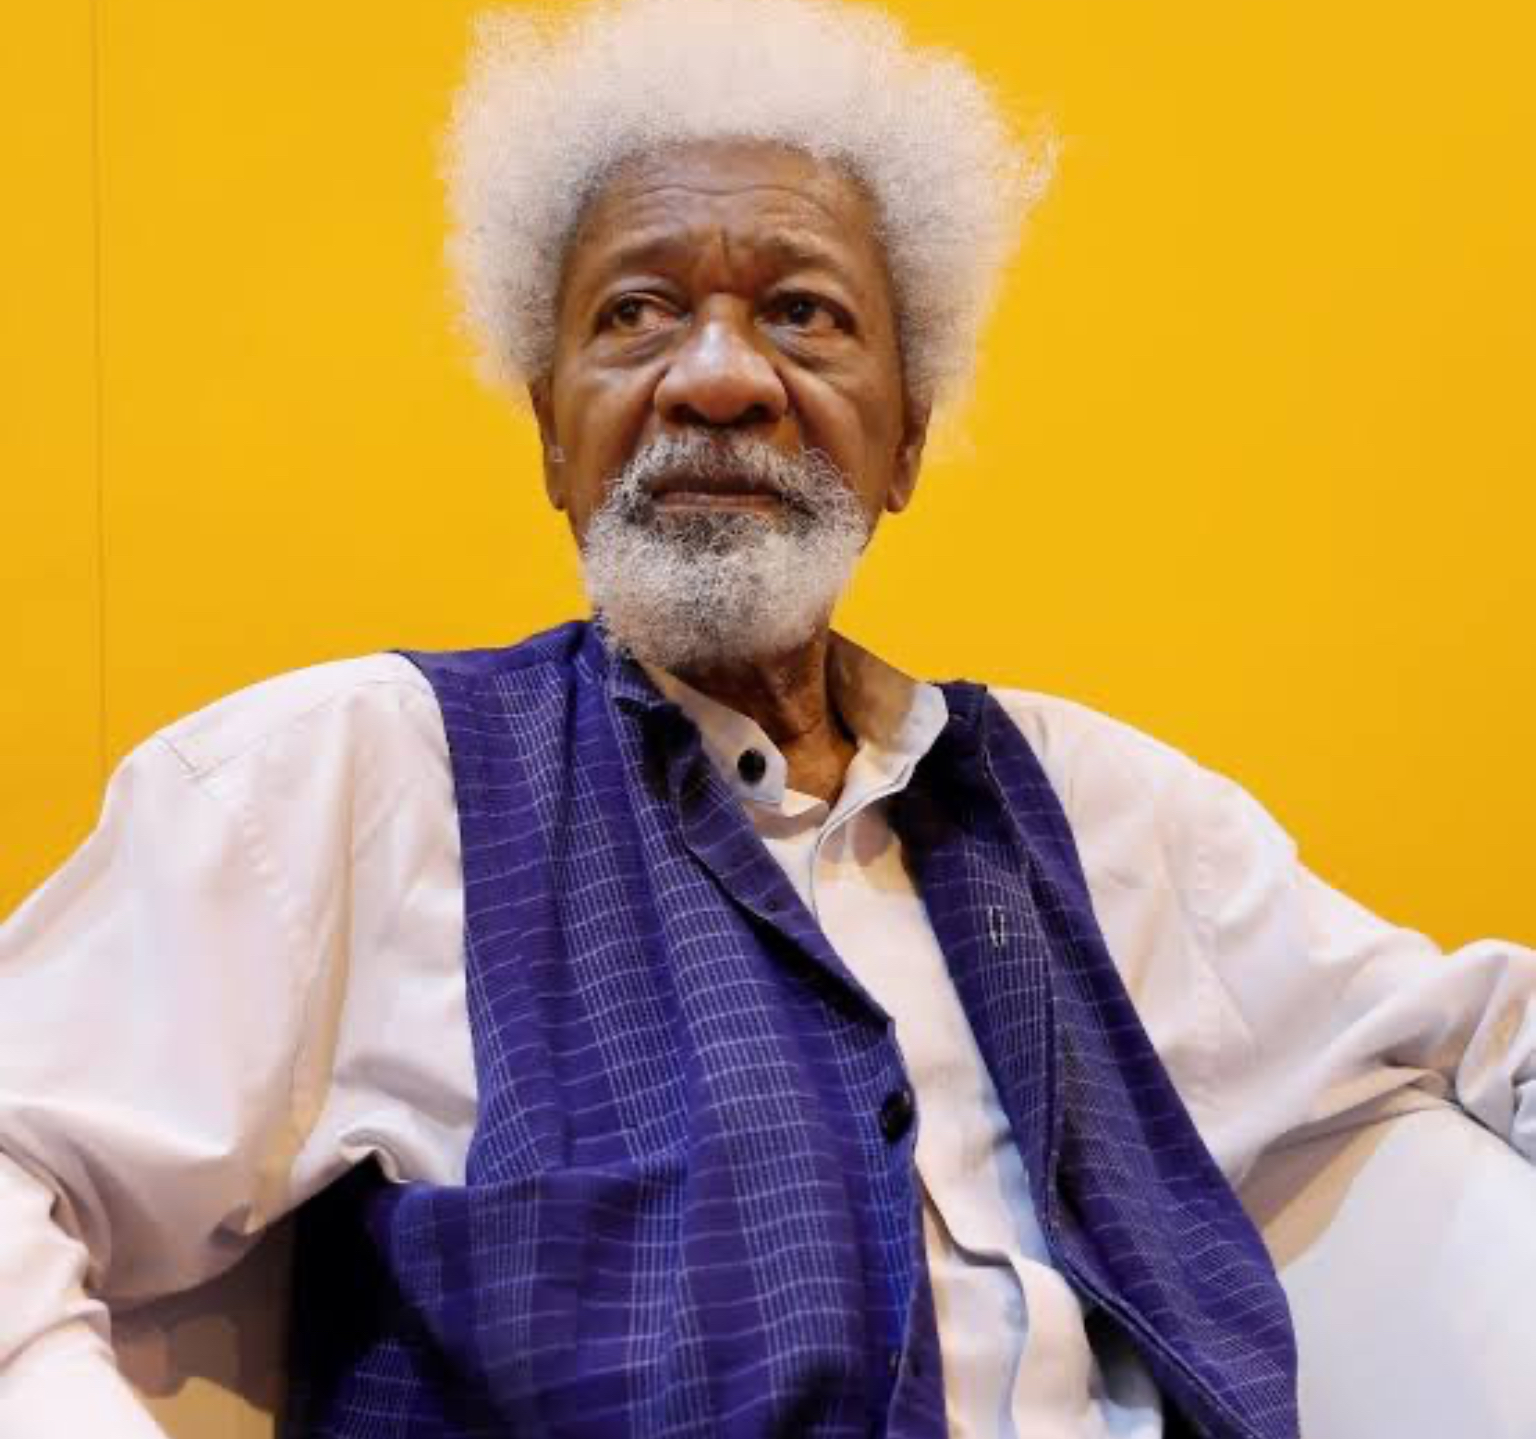 Stop Being Timid, Demand For More Autonomy, Says Soyinka